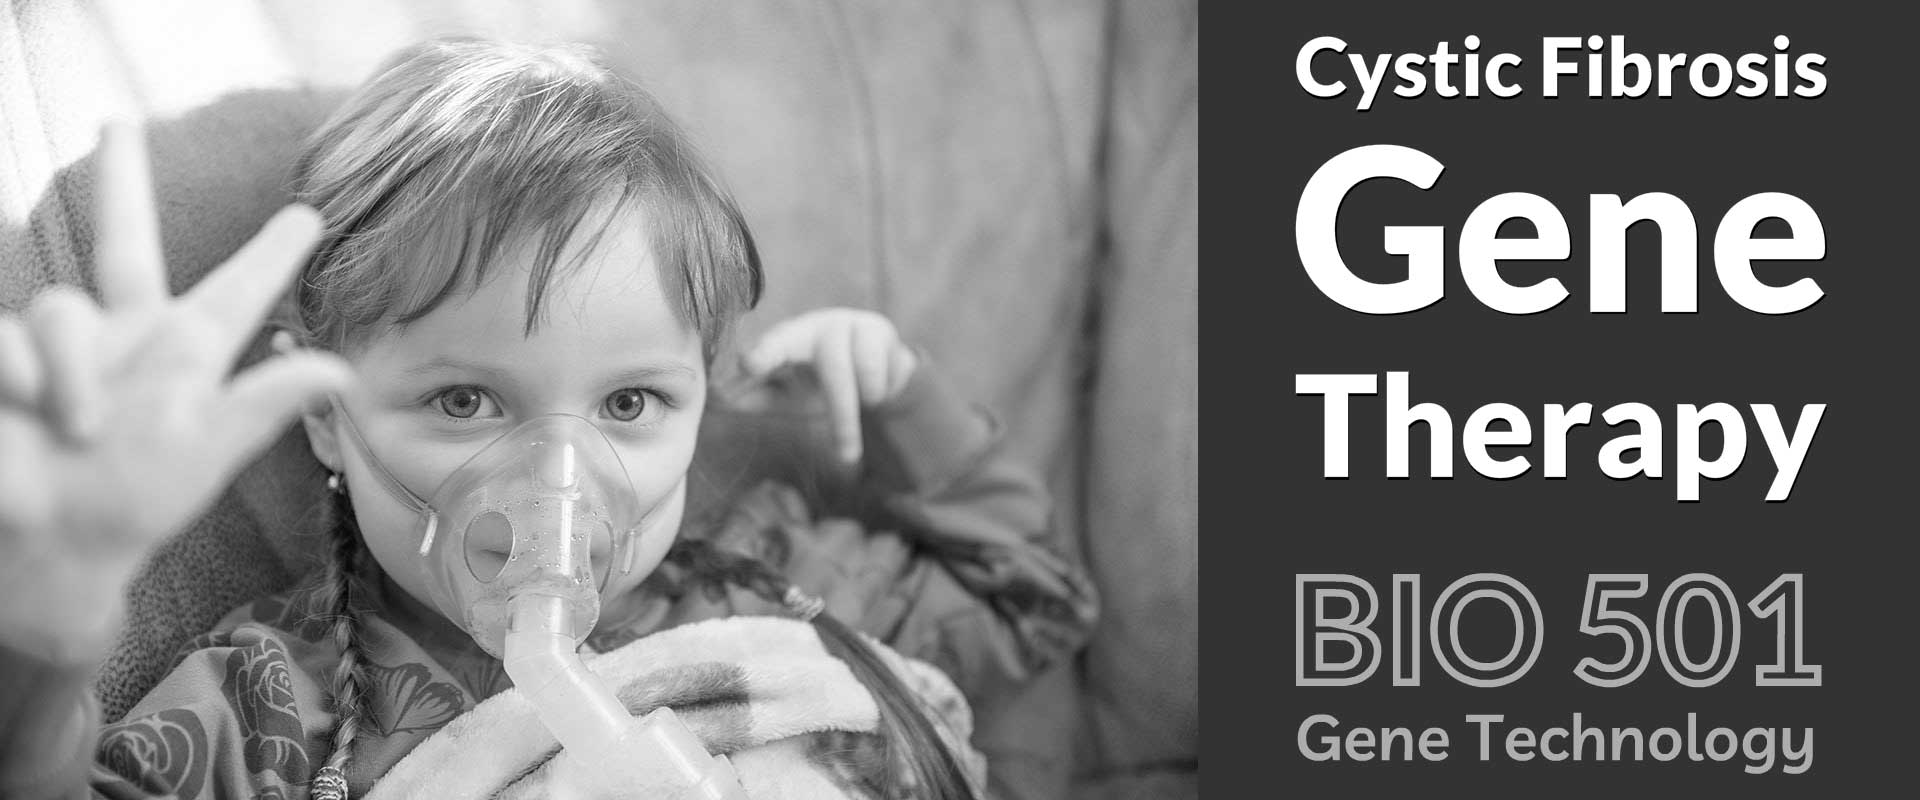 Cystic Fibrosis Gene Therapy Banner